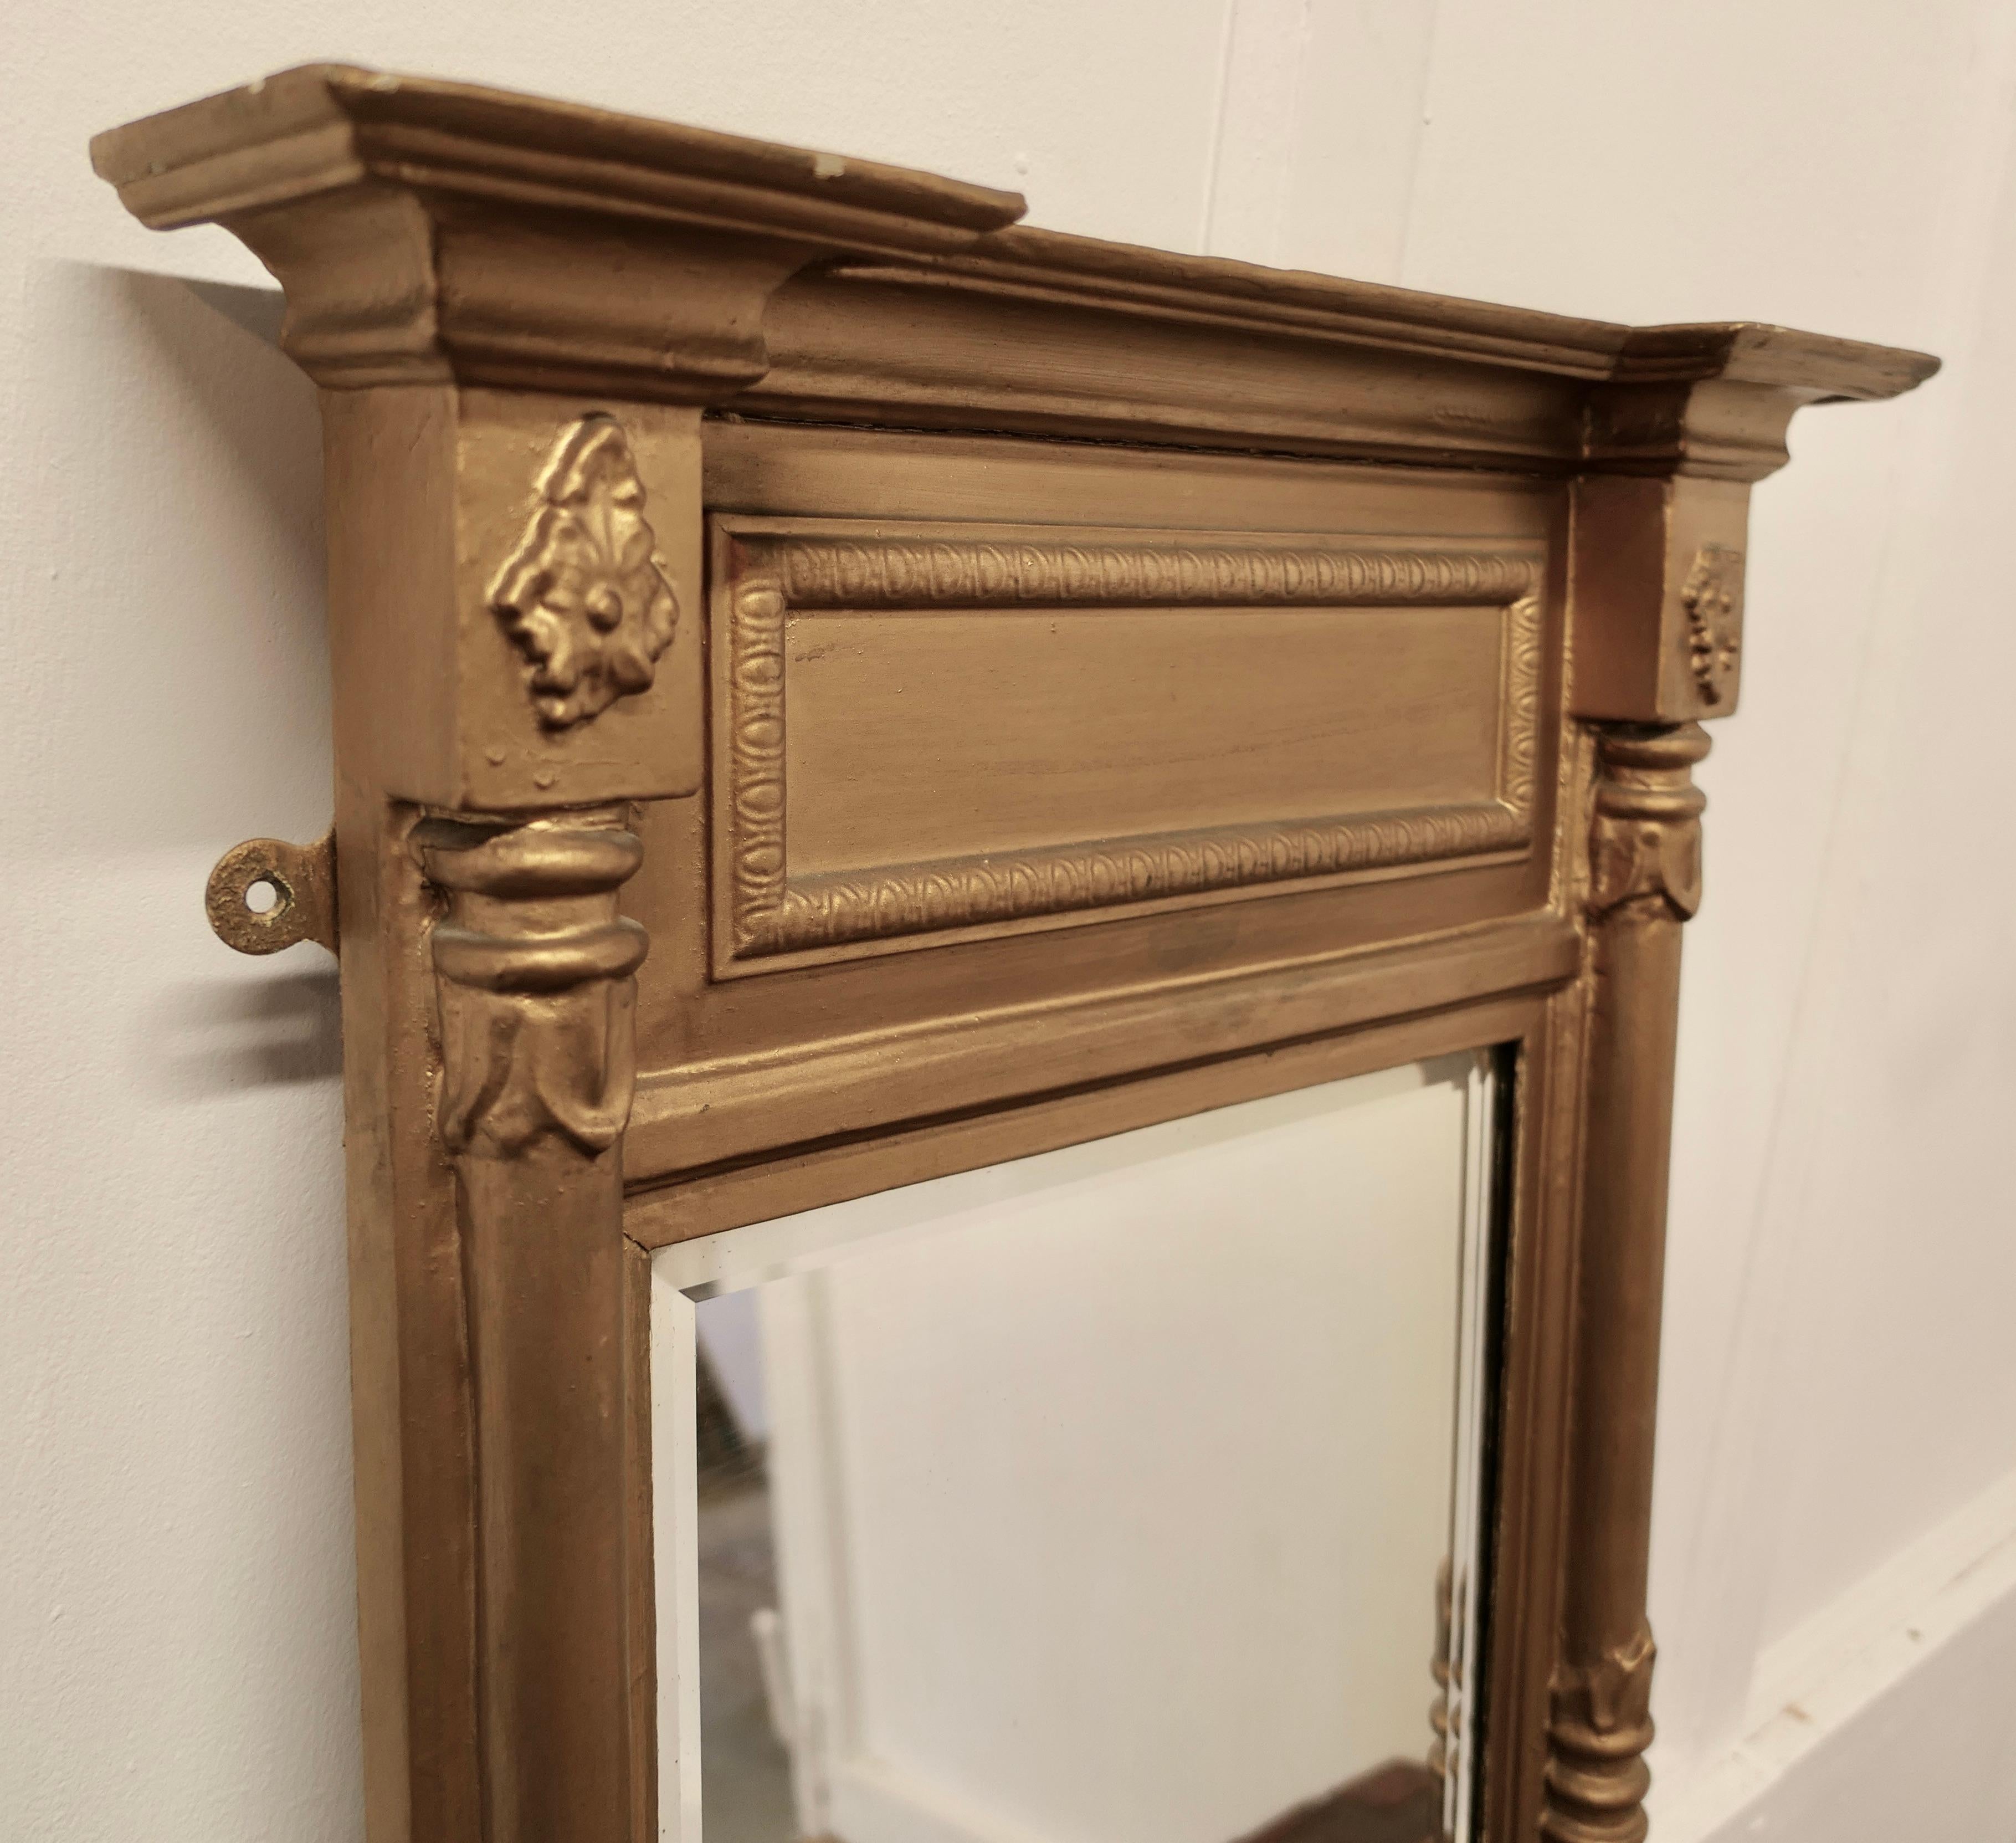 19th Century Regency Gilt Mirror  

The Regency Carved Frame has turned columns at either side and a panel  along the top, the Age Darkened Gold paint on the Frame is in generally good condition
The mirror is bevelled and and in good condition, it